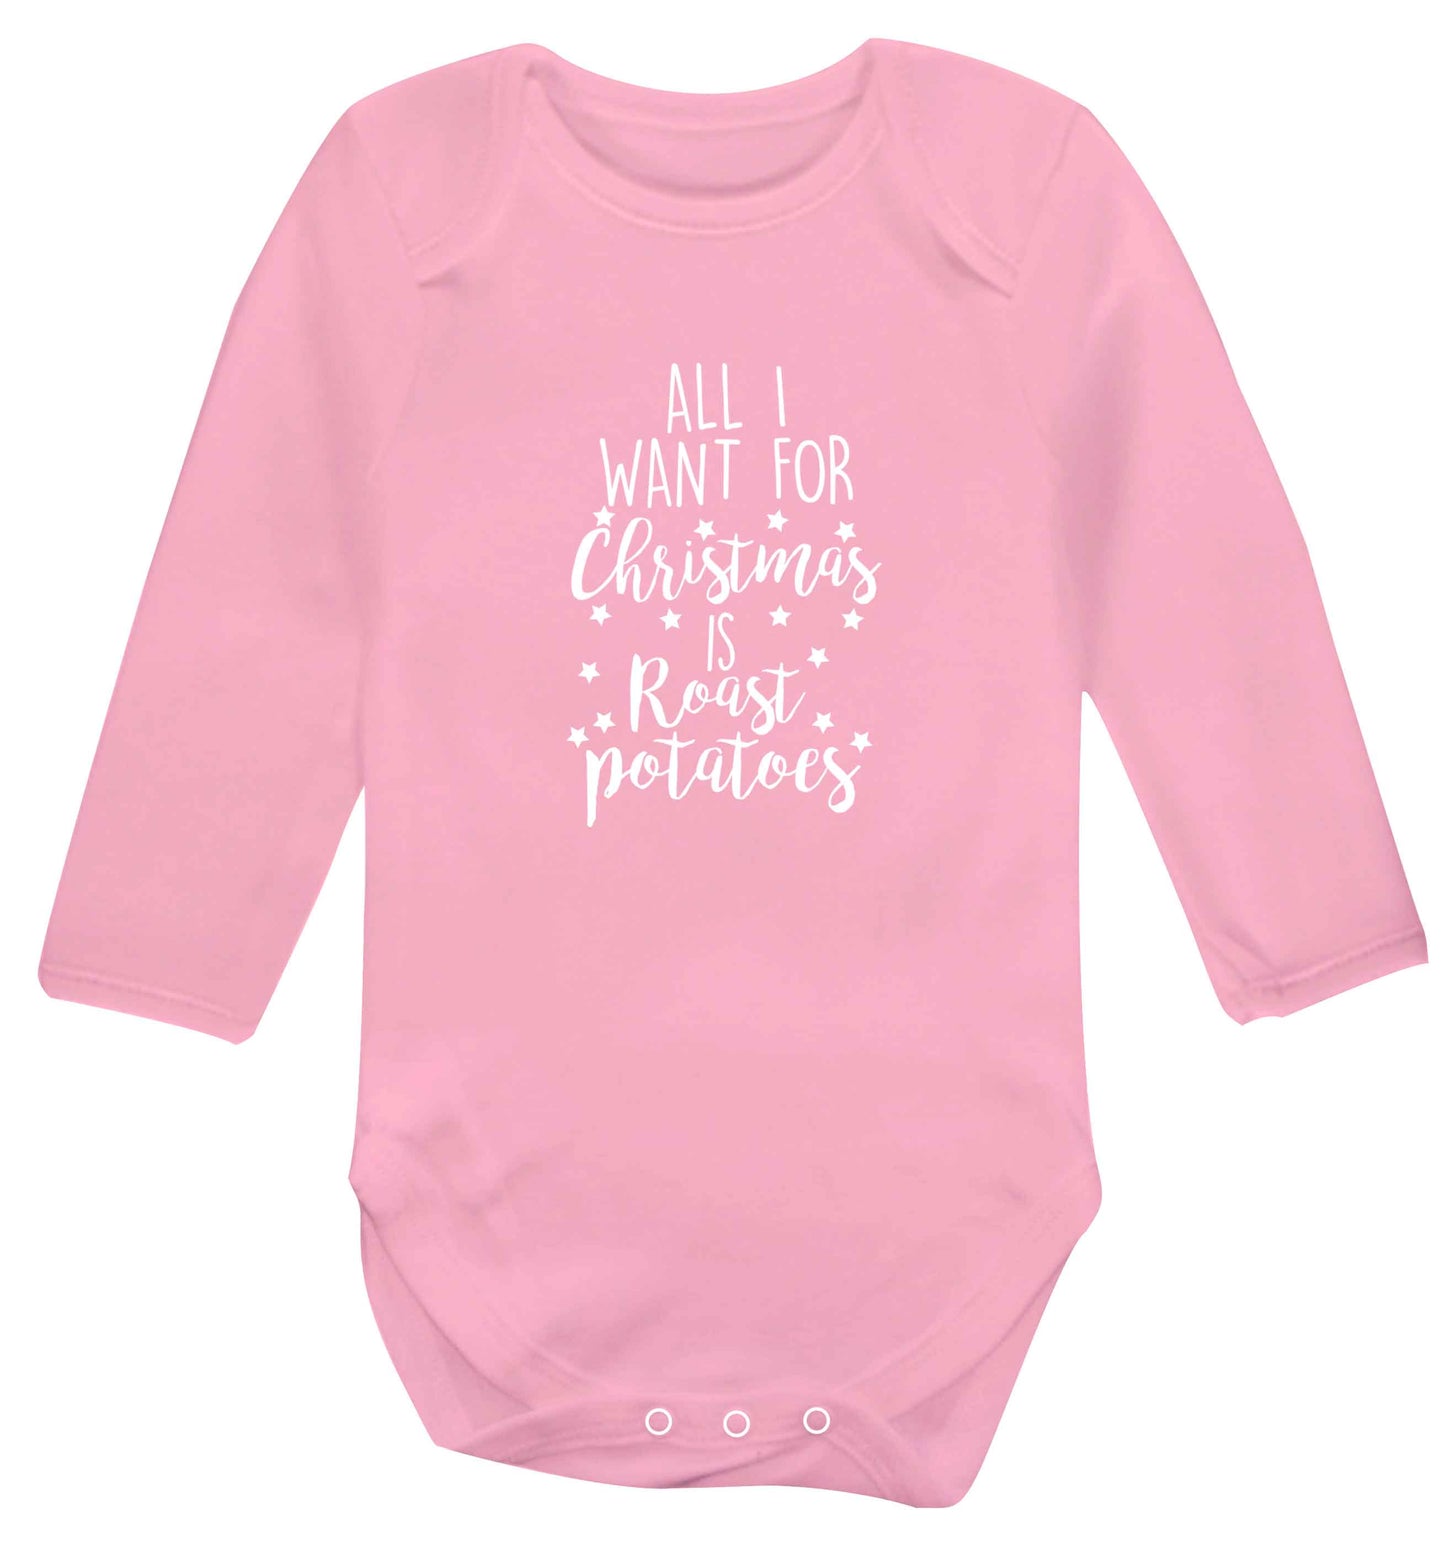 All I want for Christmas is roast potatoes baby vest long sleeved pale pink 6-12 months